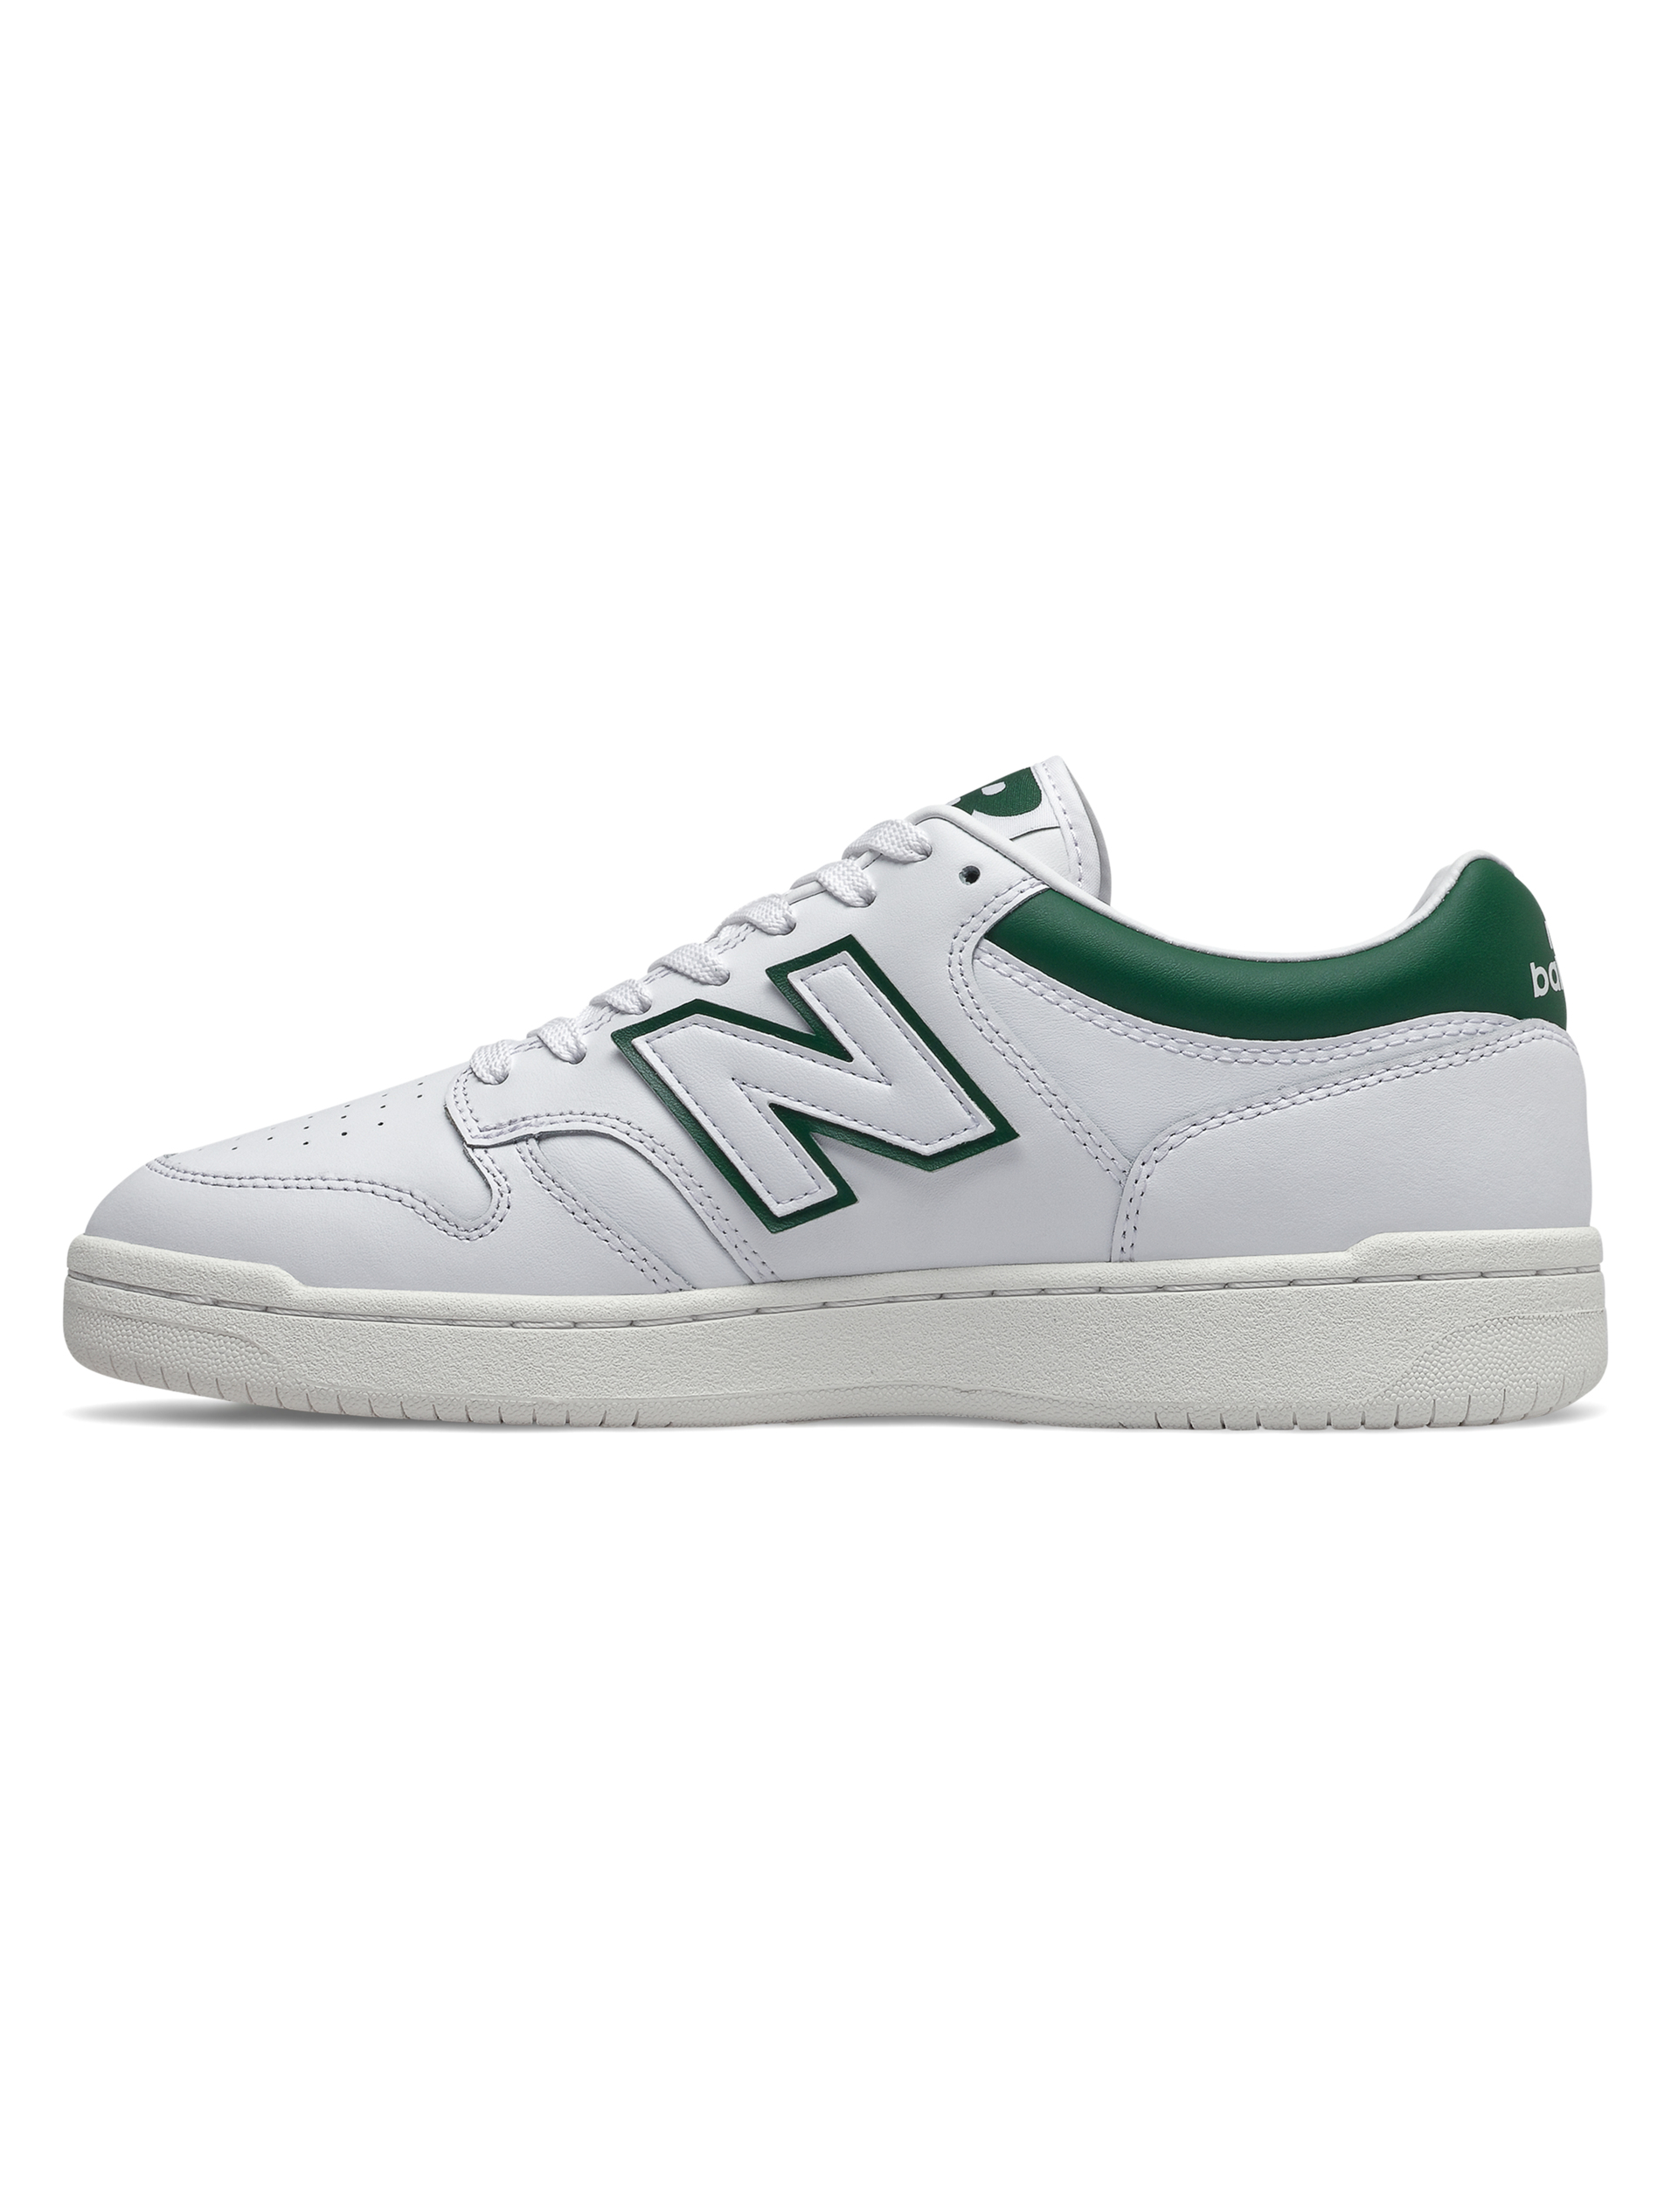 New Balance Sneakers hvid / lgt white green